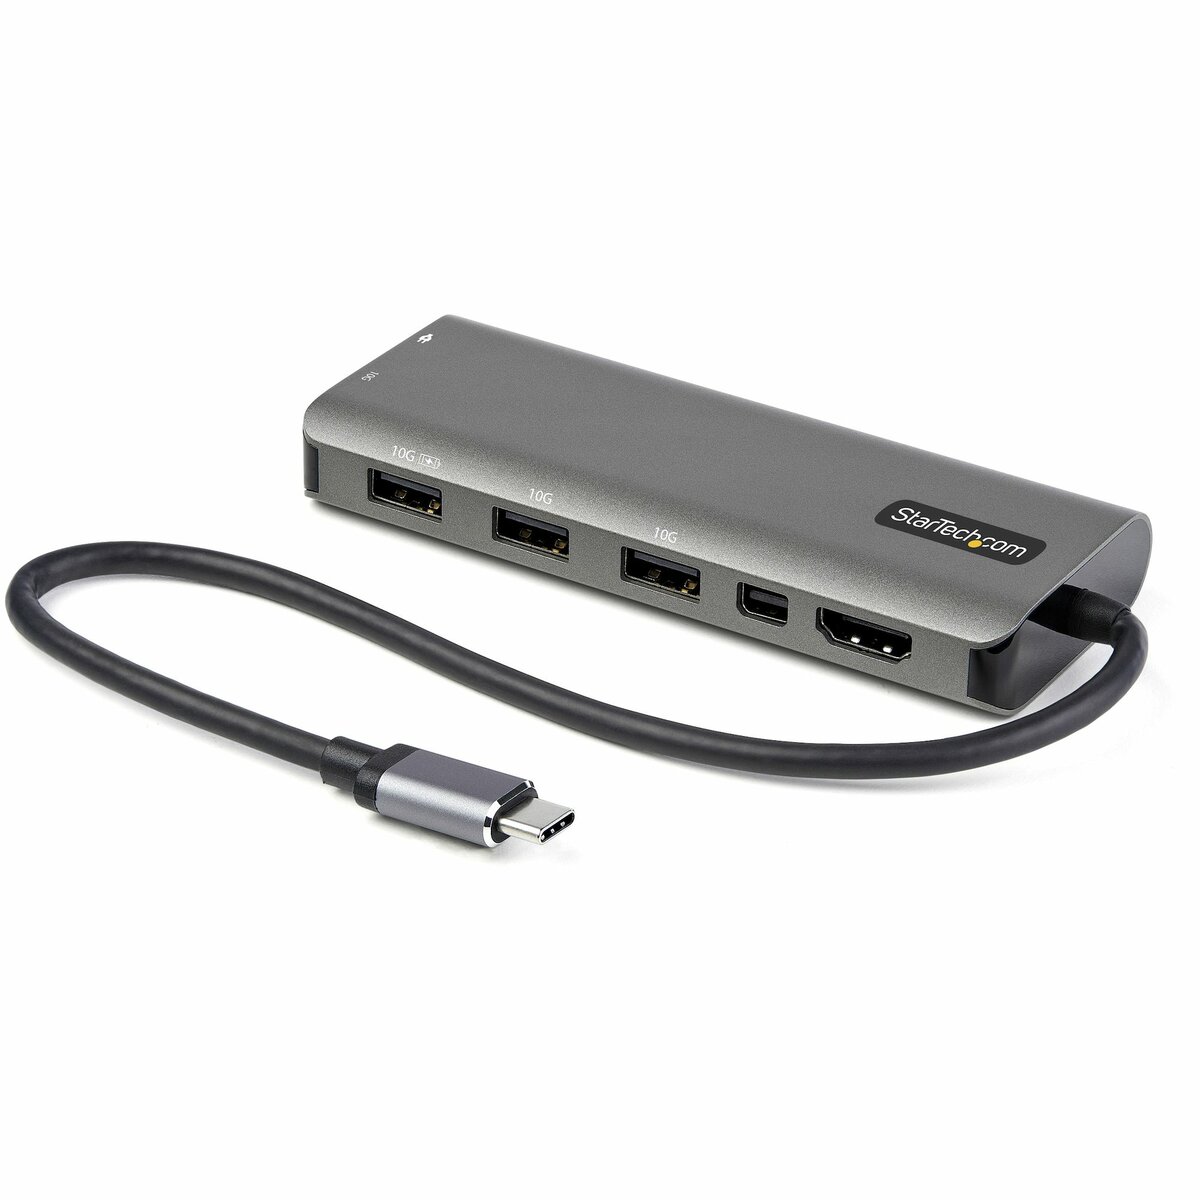 Architecture definitely Kilauea Mountain Shop | StarTech.com USB C Multiport Adapter, USB-C to HDMI or Mini  DisplayPort 4K 60Hz, 100W Power Delivery Pass-Through, 4-Port 10Gbps USB Hub,  USB Type-C Mini Dock, 12"/30cm Long Attached Cable -